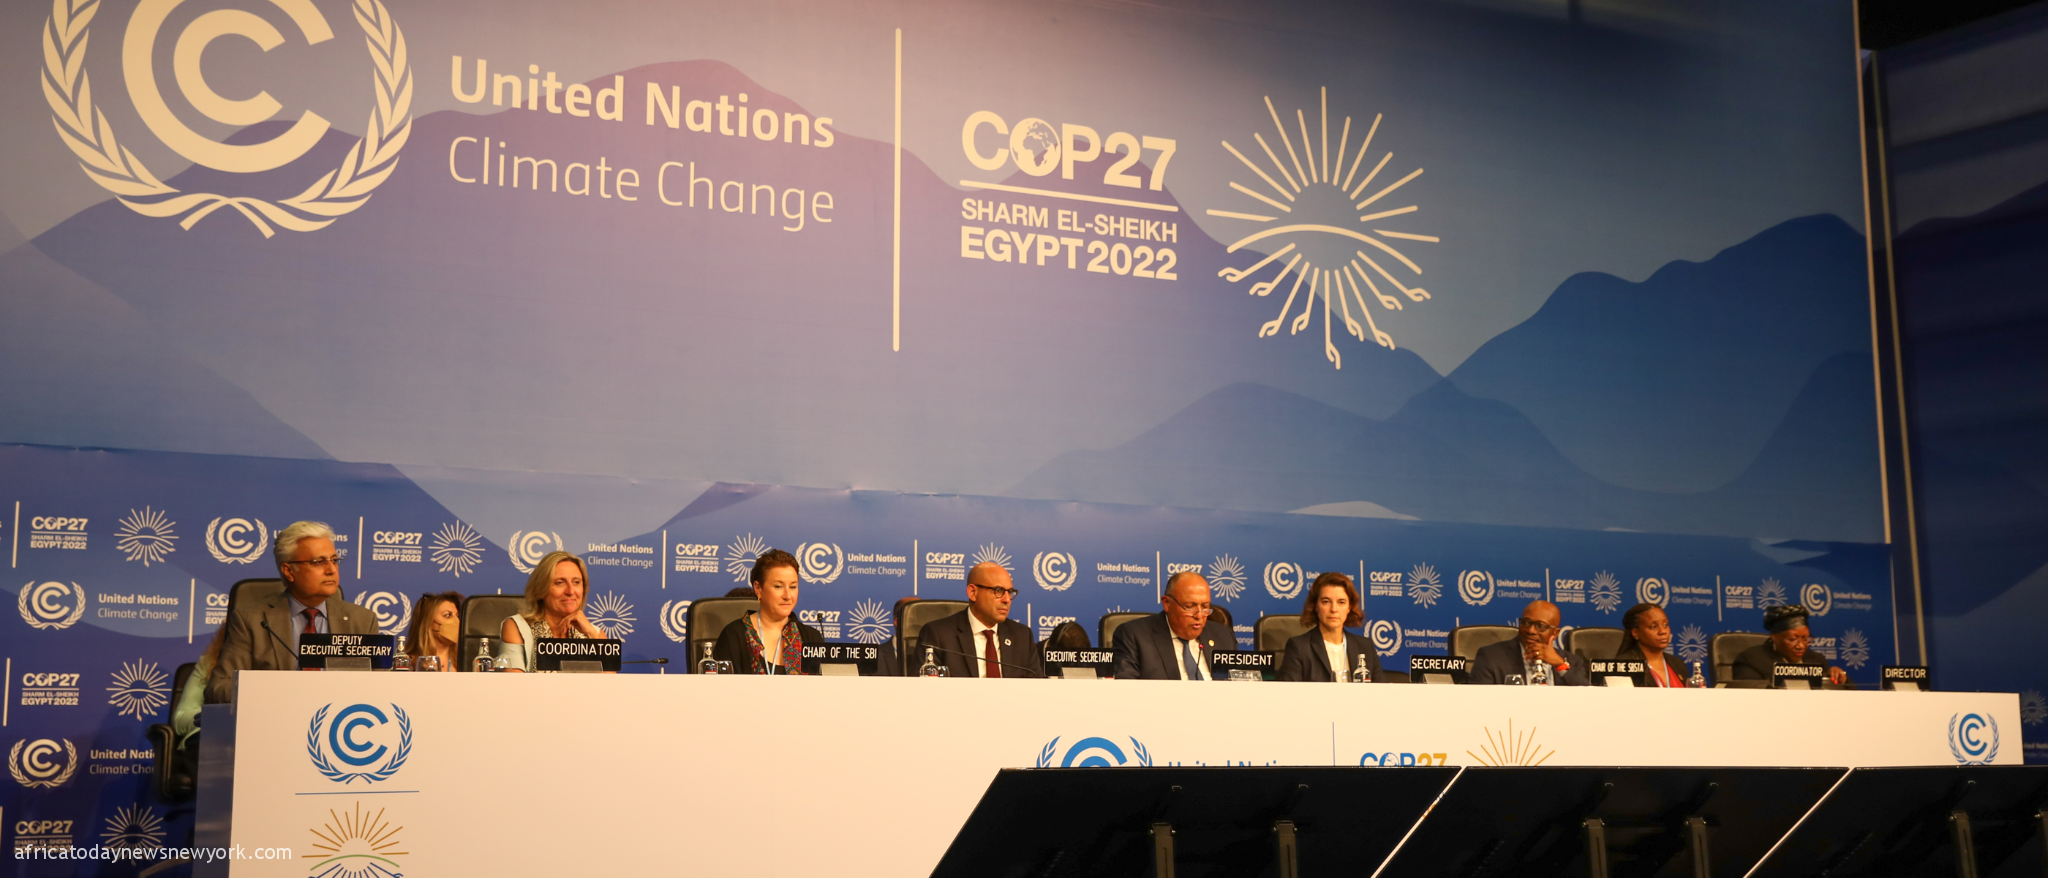 COP27: Highlights From The Climate Change Summit In Egypt